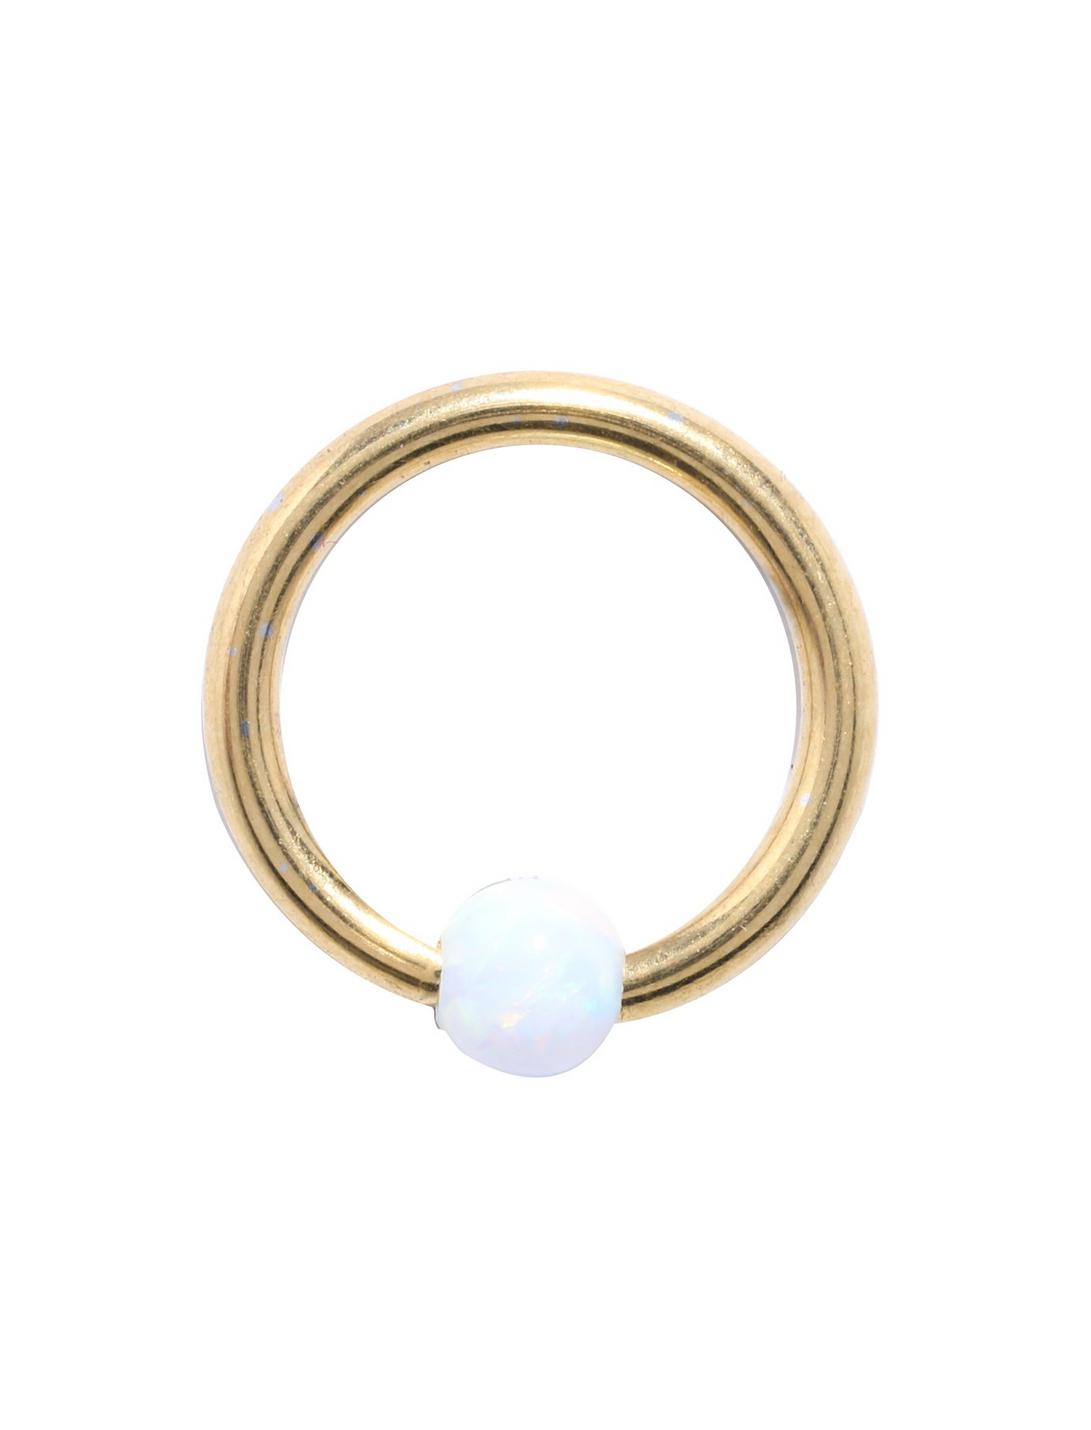 16G 5/16 Steel White & Gold Plated Captive Hoop, GOLD, hi-res